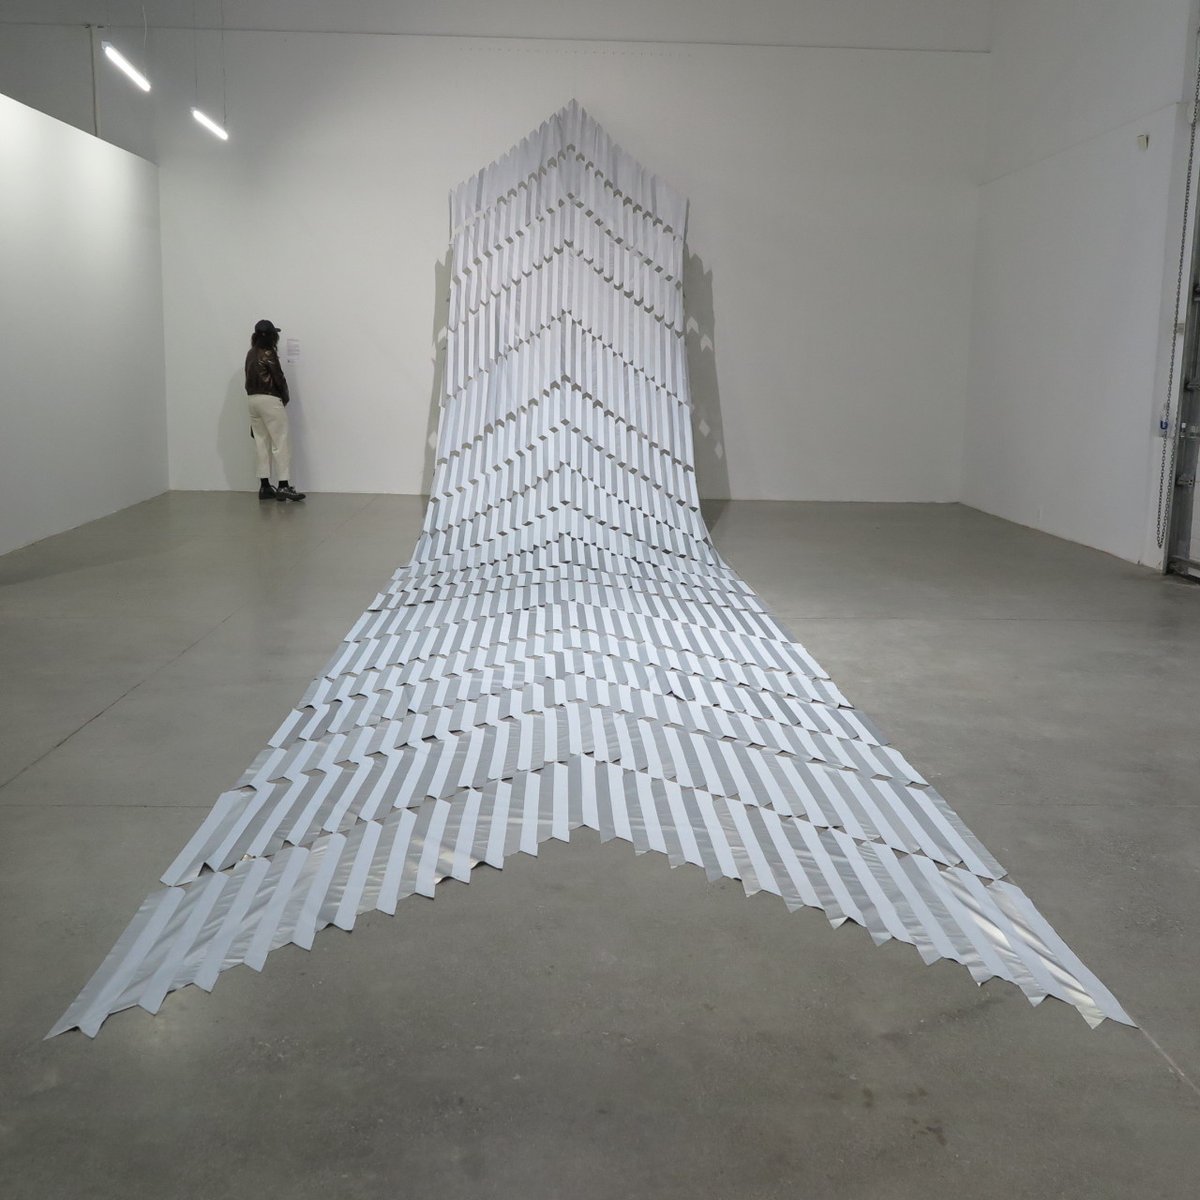 Arsenal Contemporary Art: Reflective fabric 40 metres long, stitched by @MataAhoCollective (2014) Kaokao #1, part of @TorontoBiennial. Pieced together by Maori artists, in a tukutuku chevron design used both as a military symbol and birthing… bit.ly/3ytKofU [tumblr]